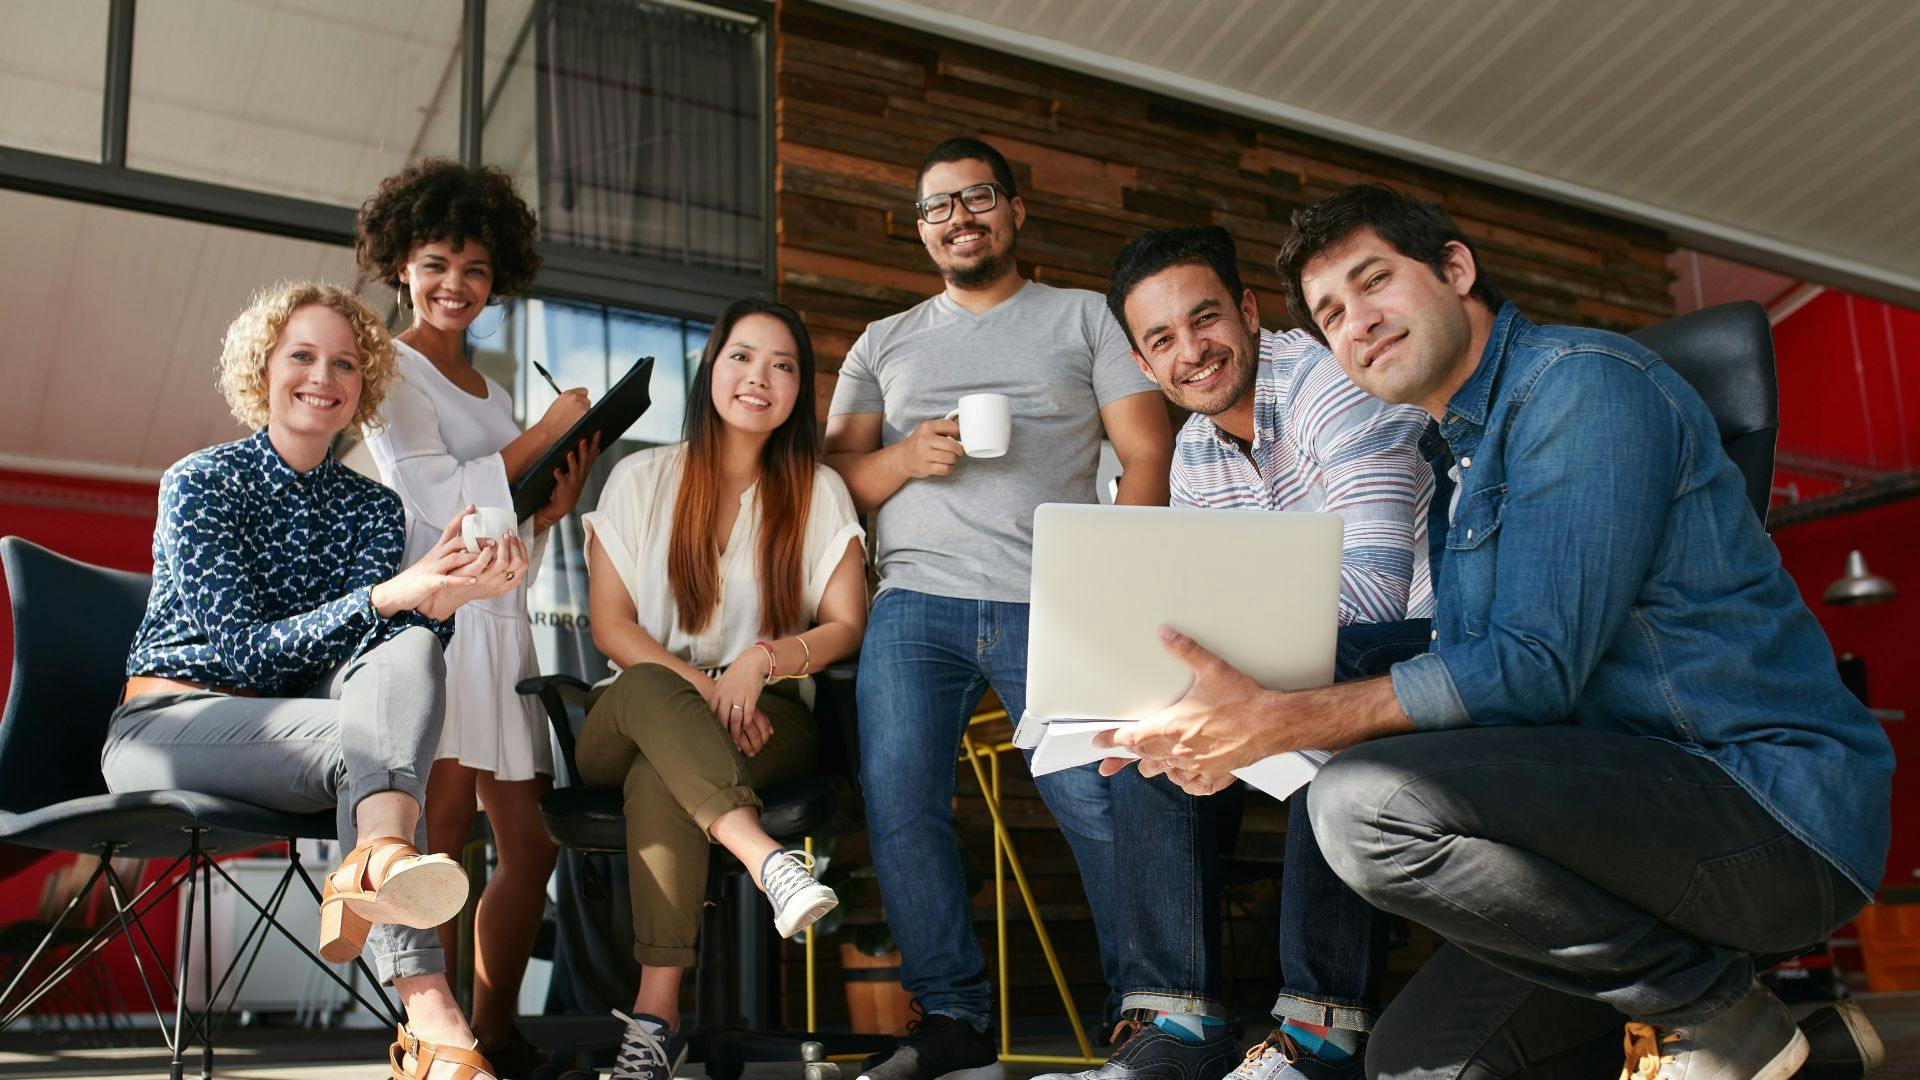 A cheerful group of individuals sitting on chairs at work, wearing smiles on their faces.